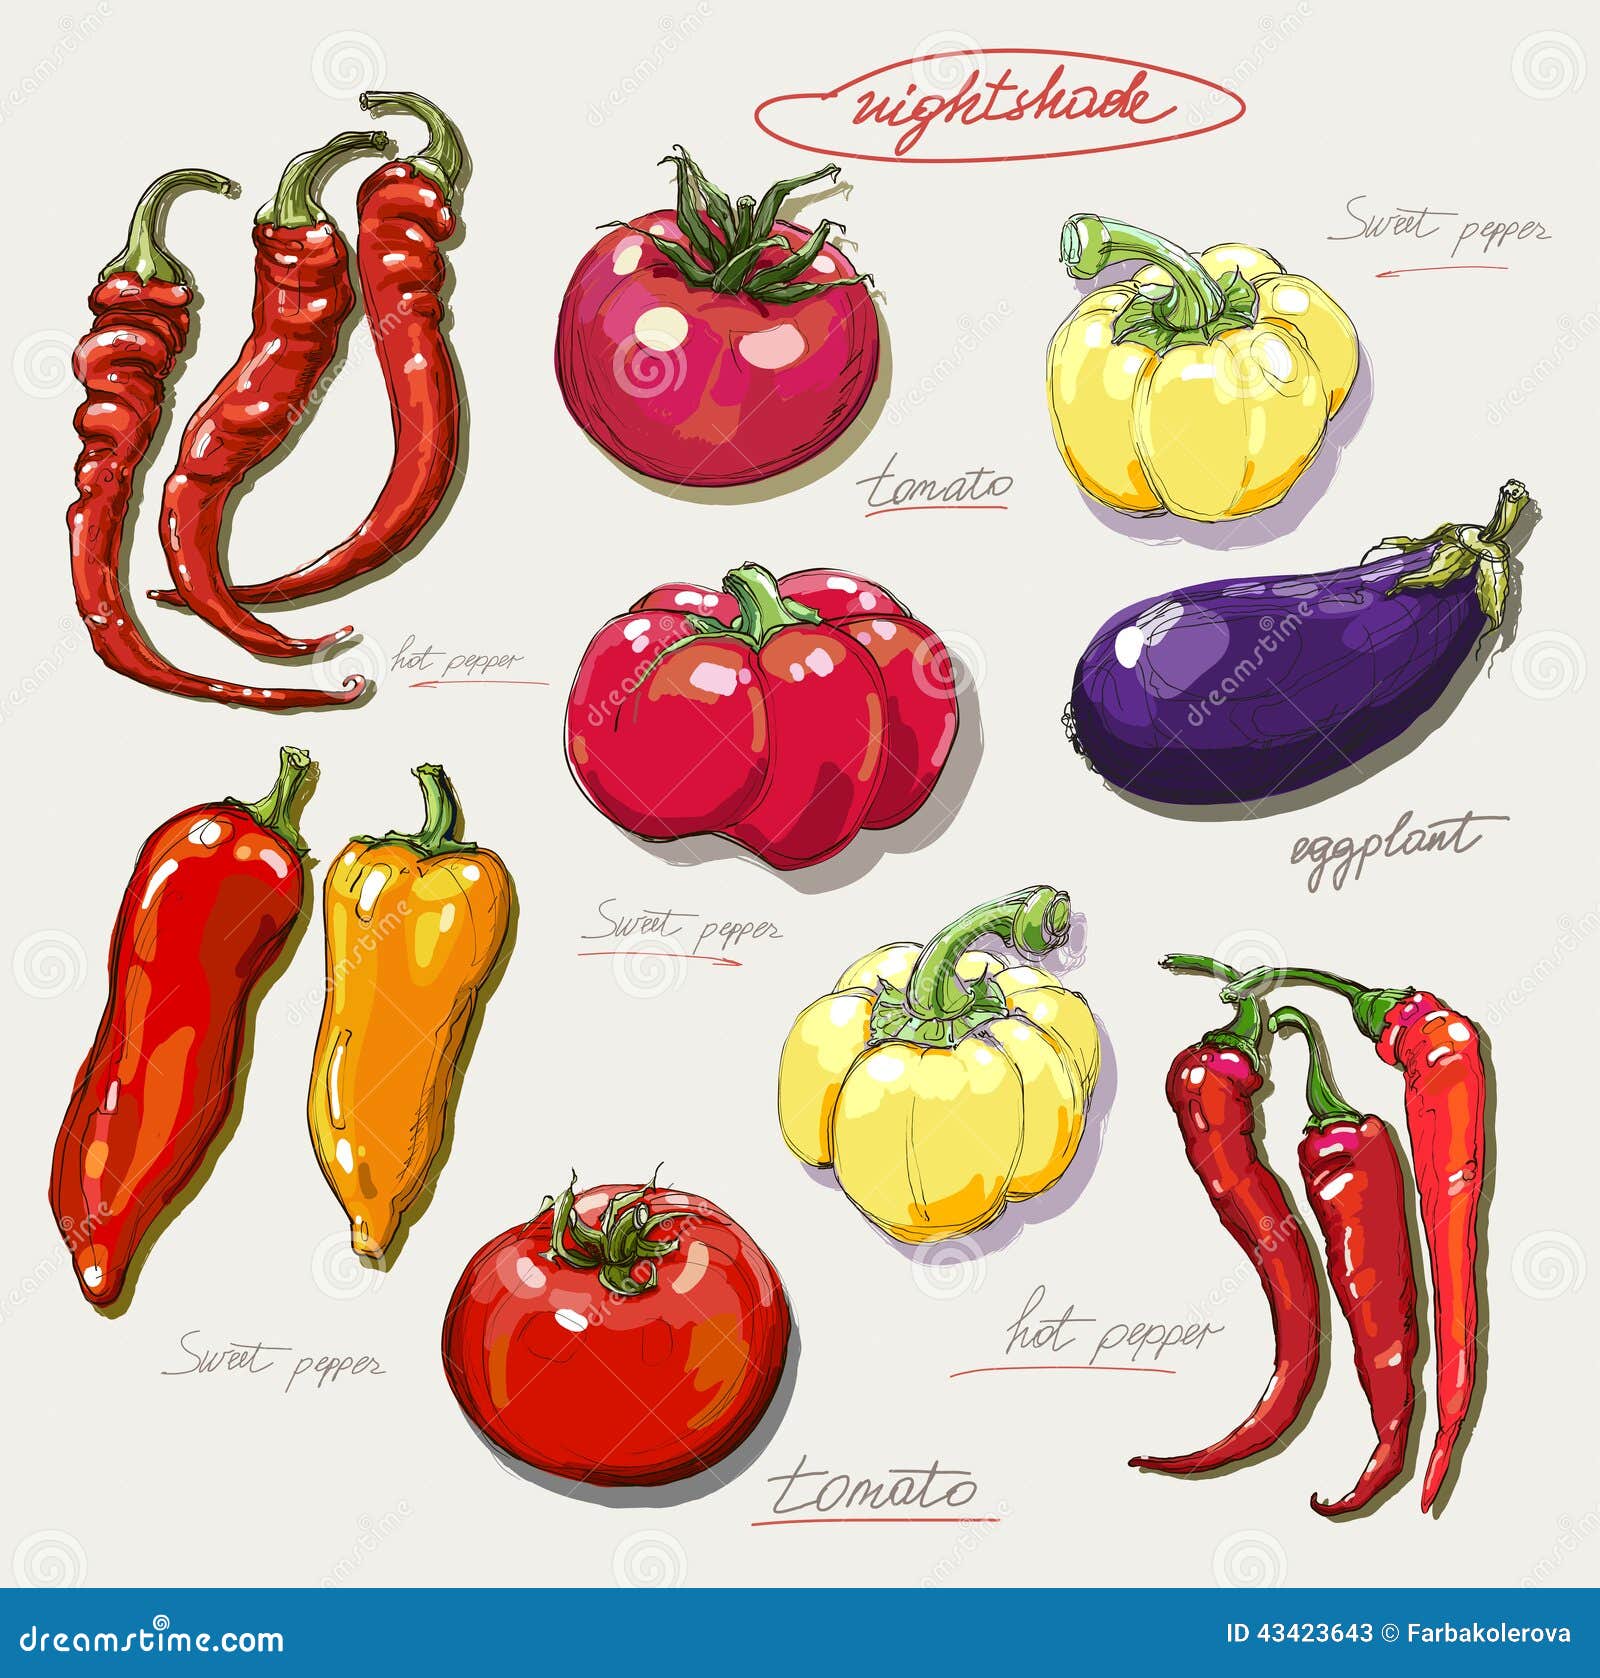 Vegetable drawing Images - Search Images on Everypixel